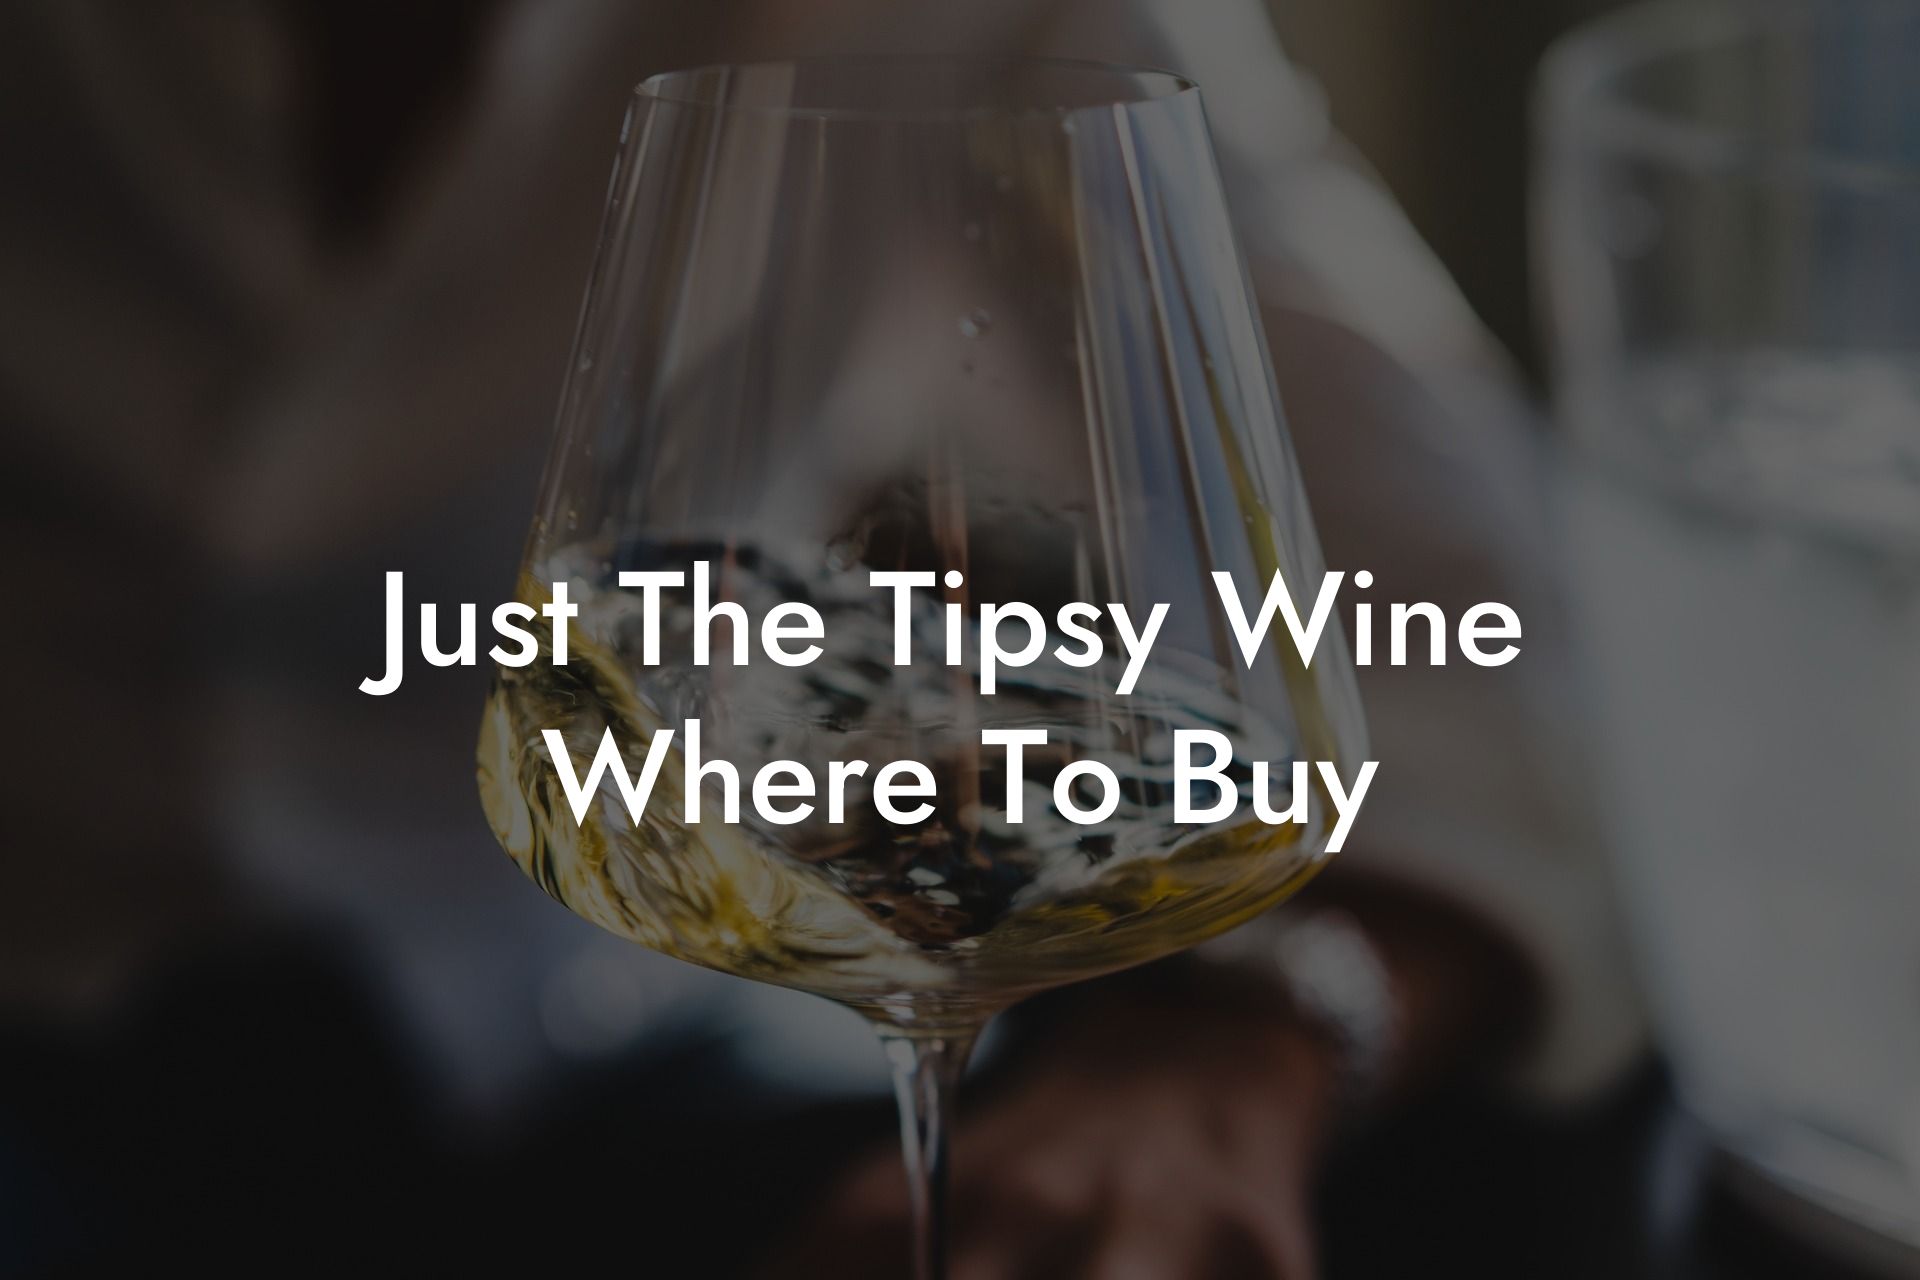 Just The Tipsy Wine Where To Buy